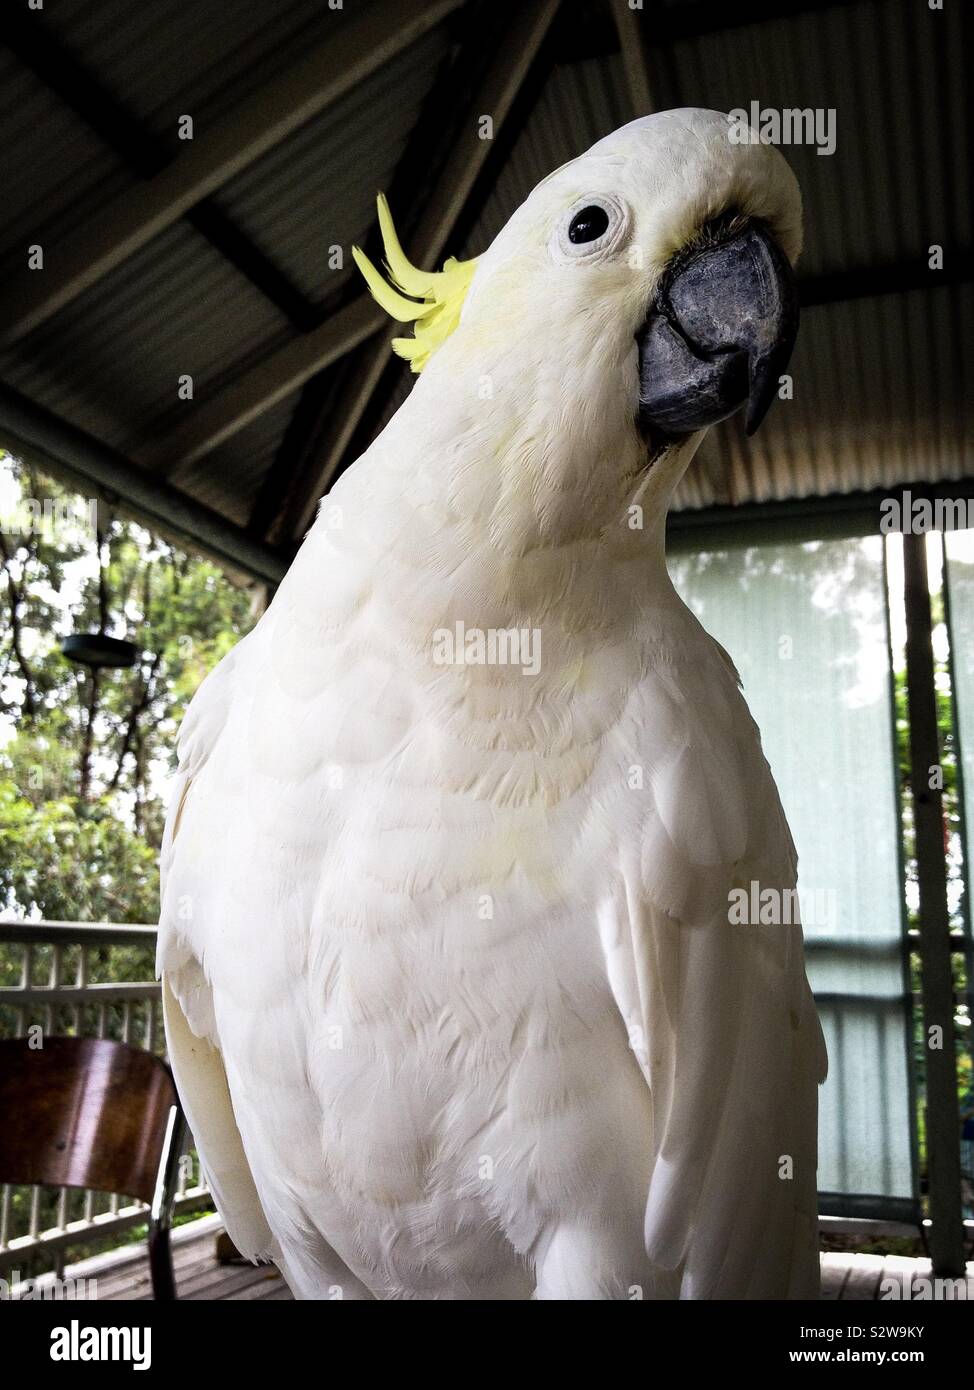 A cheeky and tame native Australian yellow crested cockatoo bird saying g’day mate Stock Photo